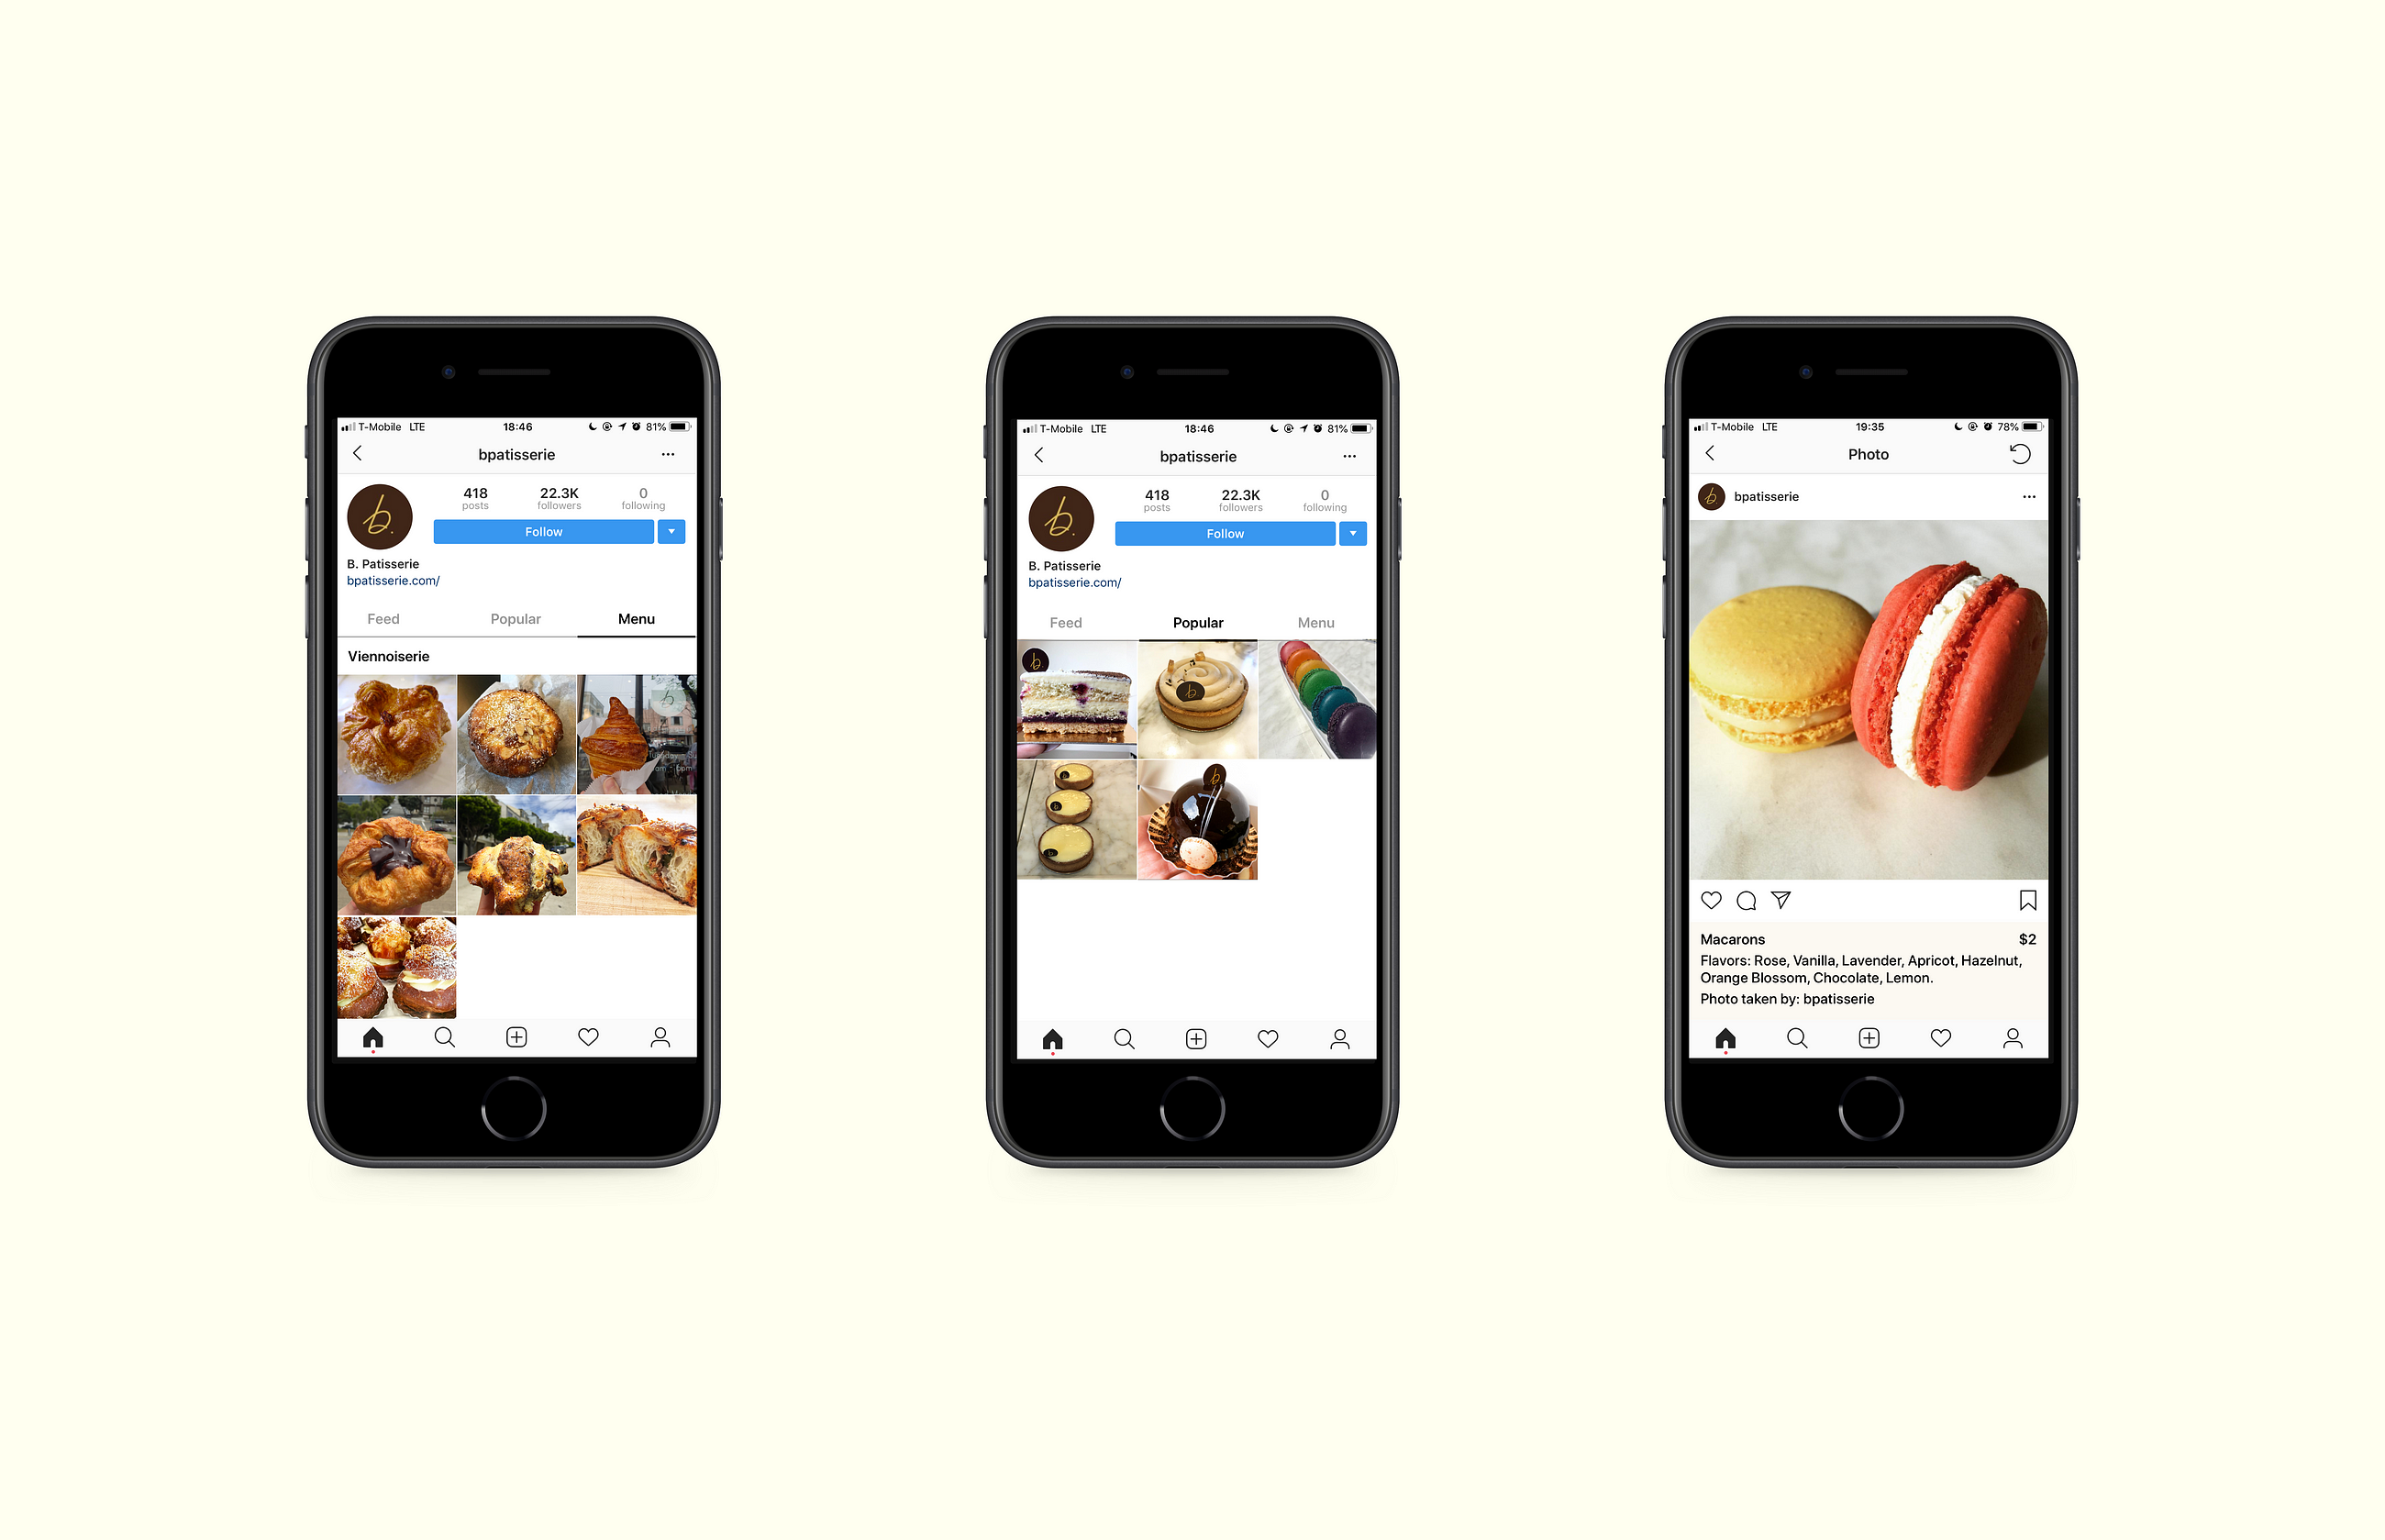 Cataloging The Vast Trove Of Food Pics On Instagram